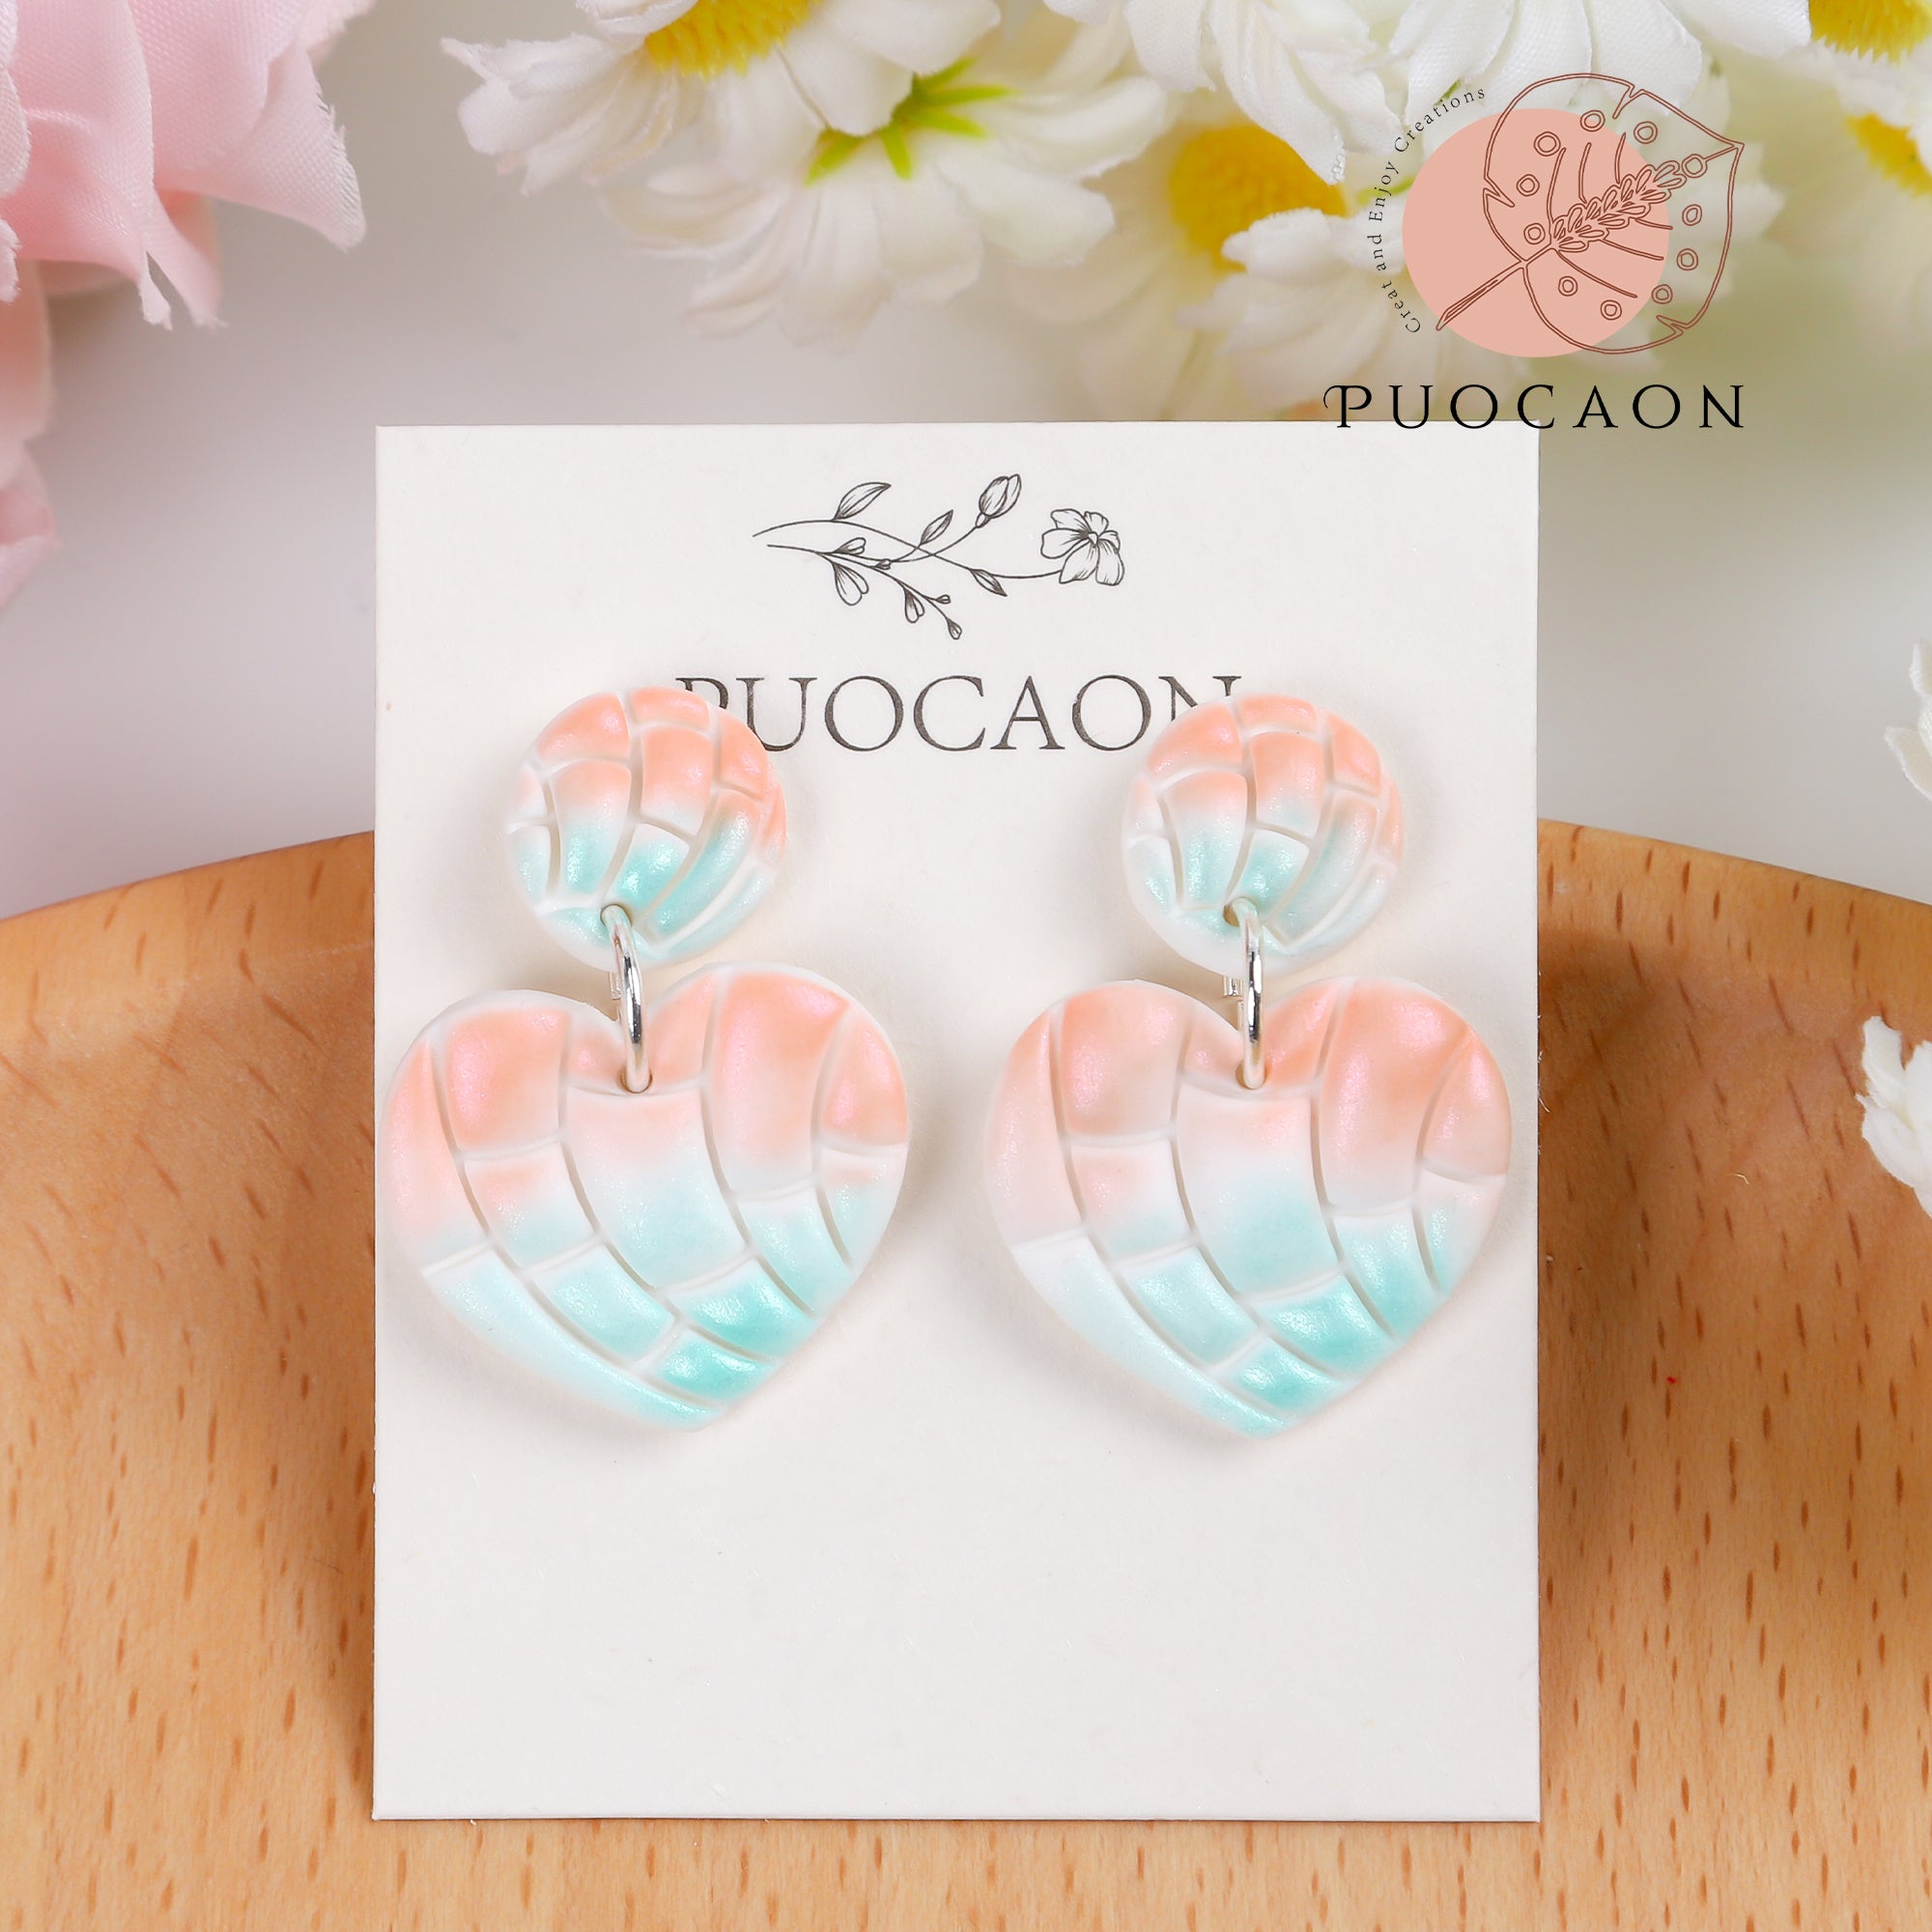 Puocaon Scallop Polymer Clay Cutters 7 Pcs